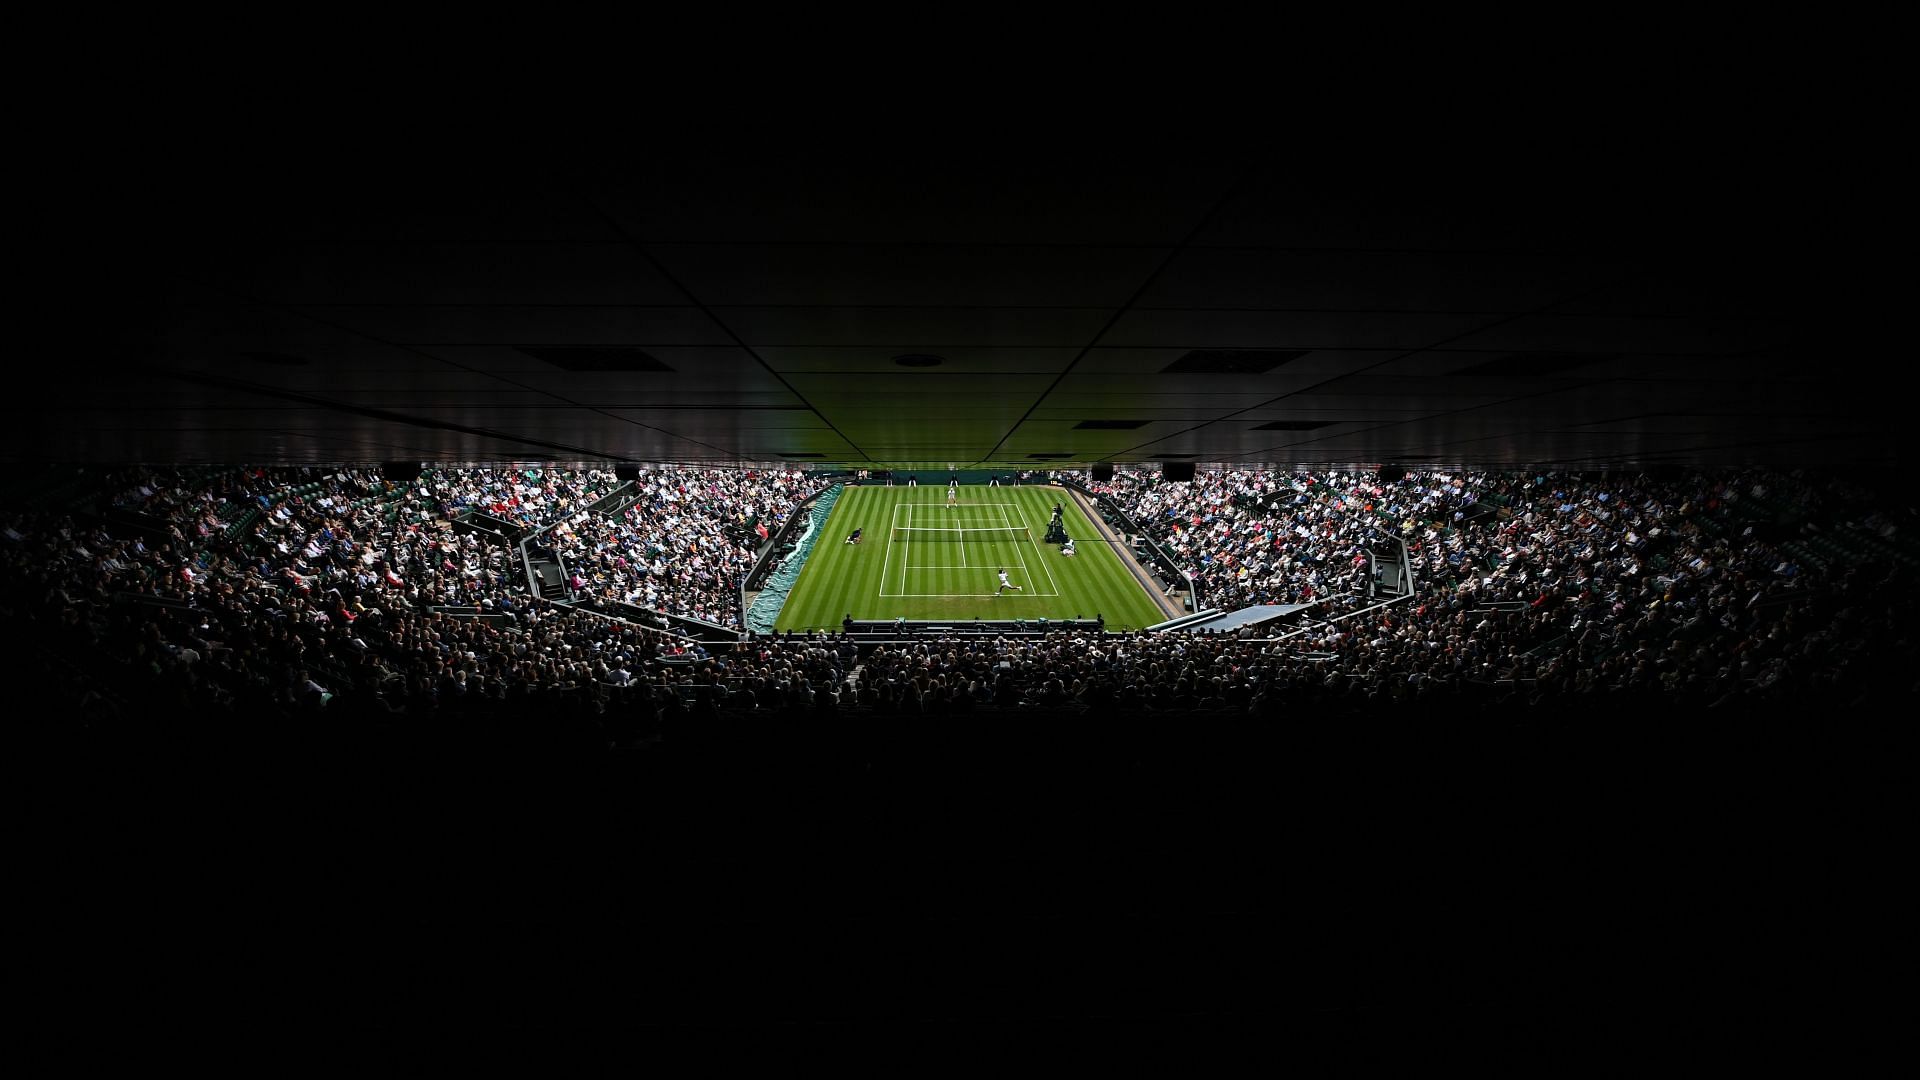 A general view of the Wimbledon centre court.